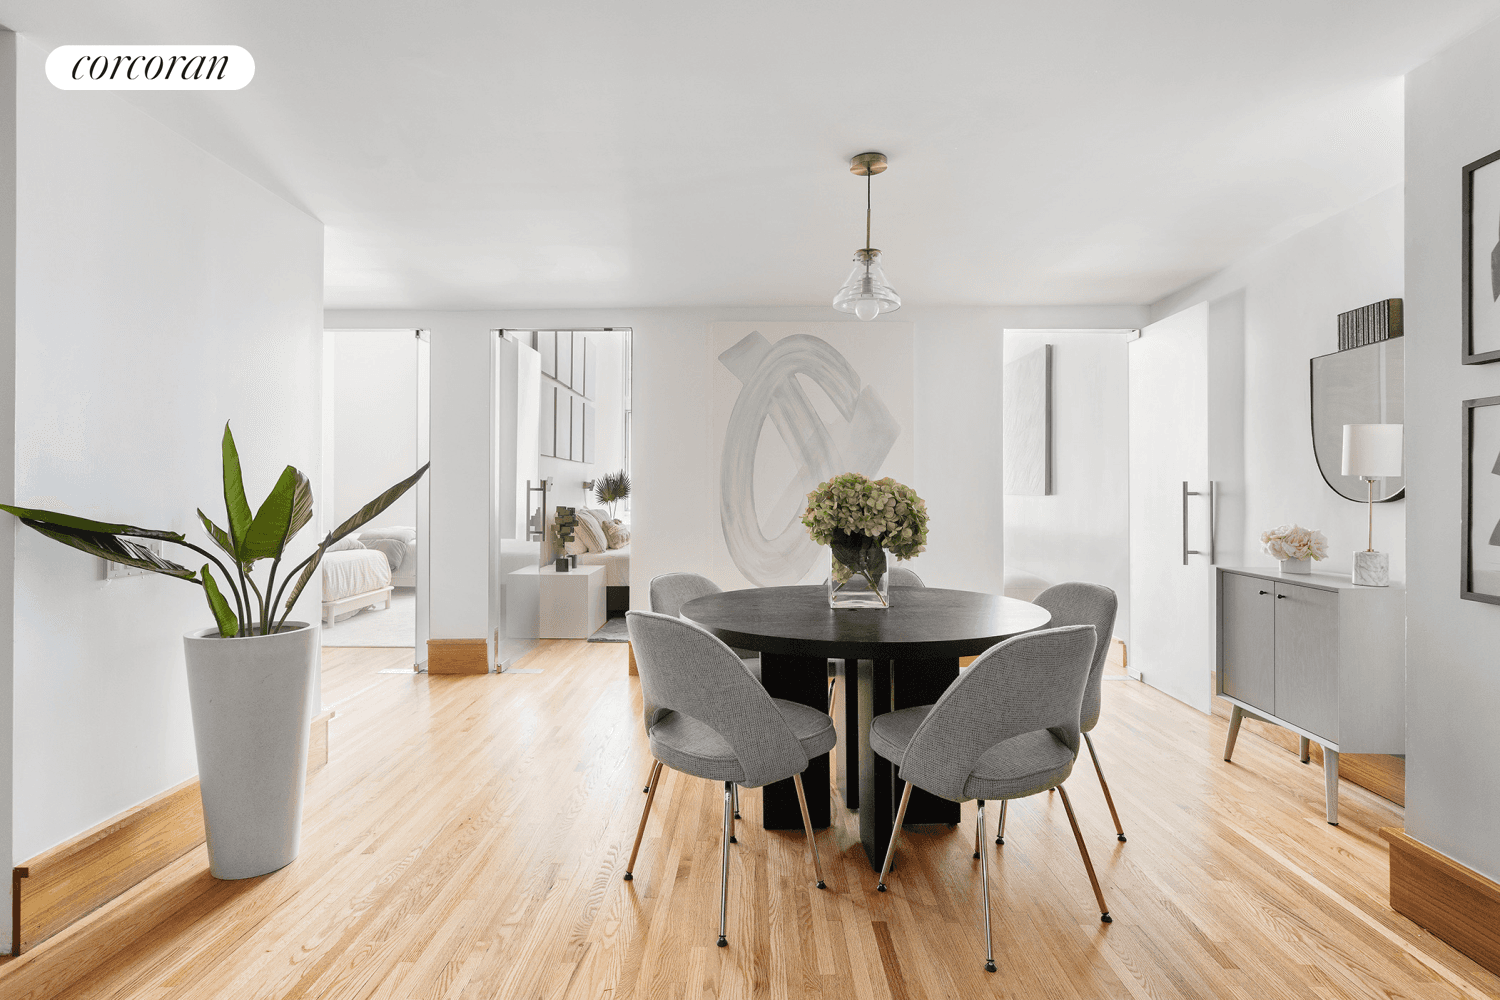 Uniquely beautiful from every angle, this three bedroom, two bathroom plus loft condominium delivers unbelievable scale, original architectural detail and a sprawling private terrace in a Gramercy doorman building.